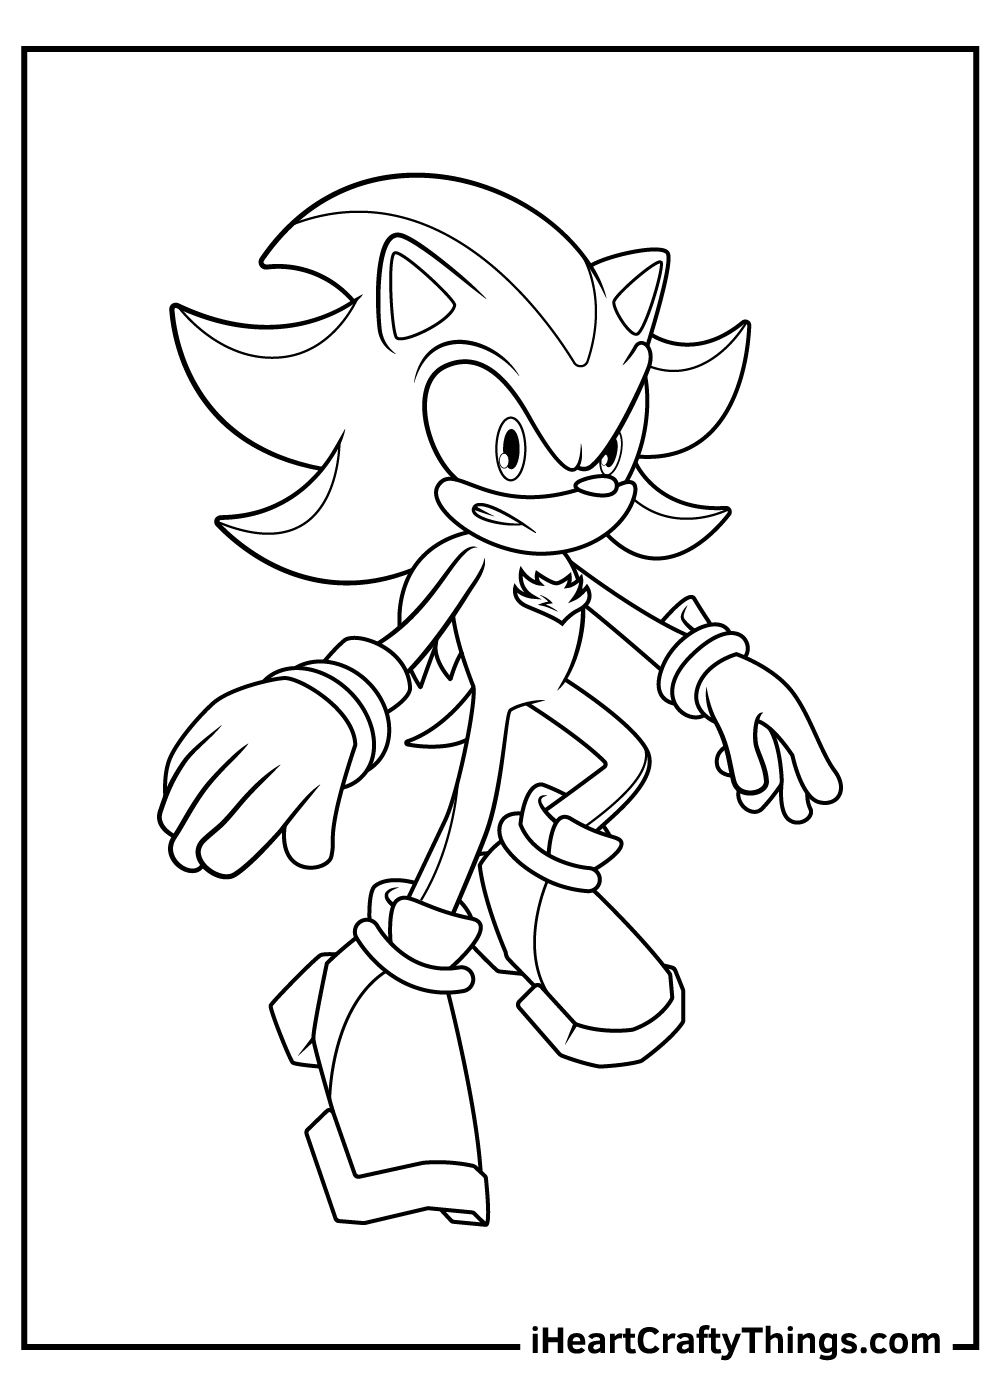 Shadow the hedgehog coloring pages coloring pages hedgehog colors coloring books